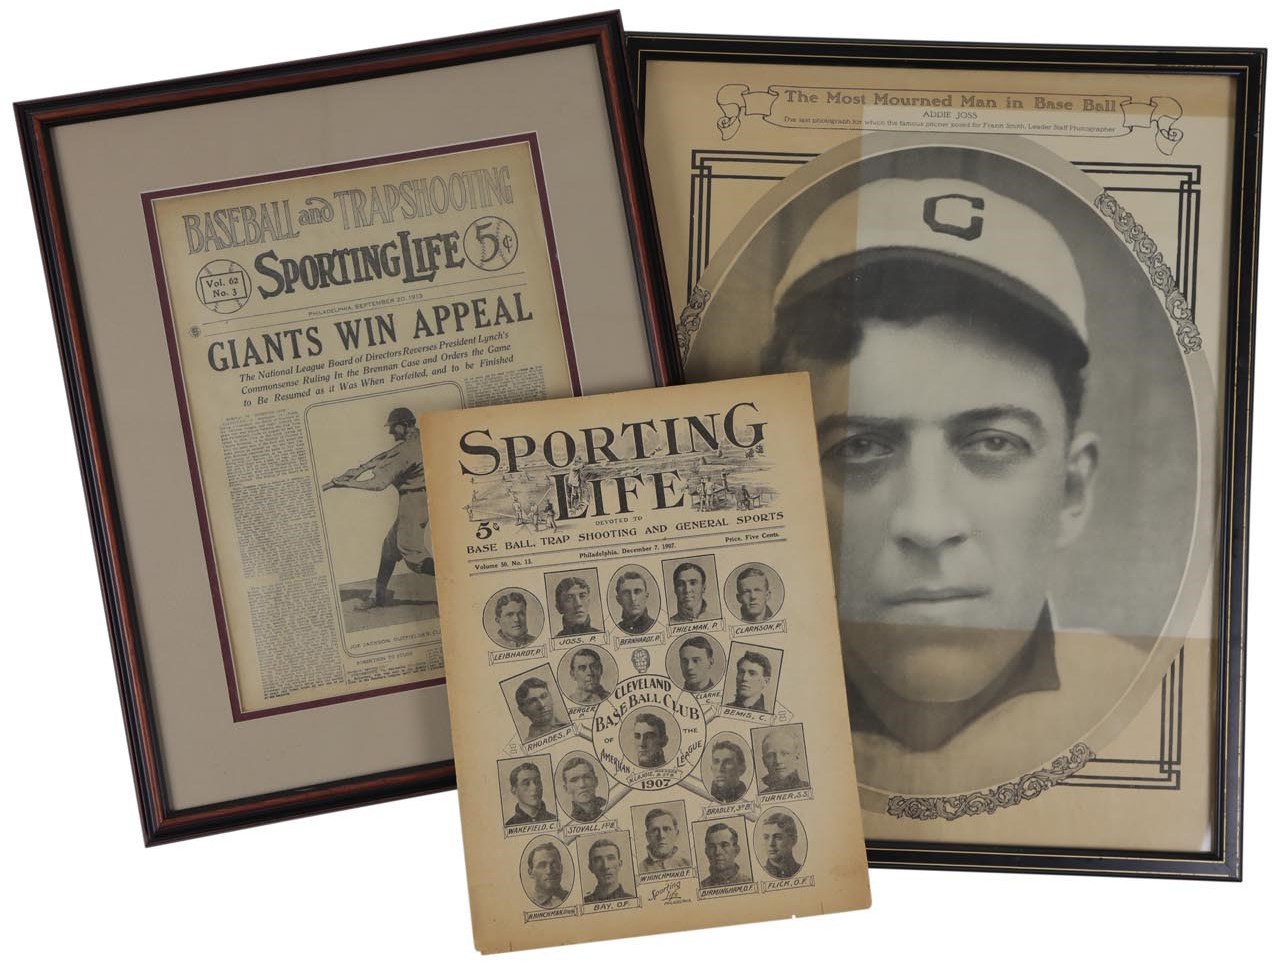 Cleveland Indians - Three Cleveland Indians Publications With Shoeless Joe Jackson and Addie Joss